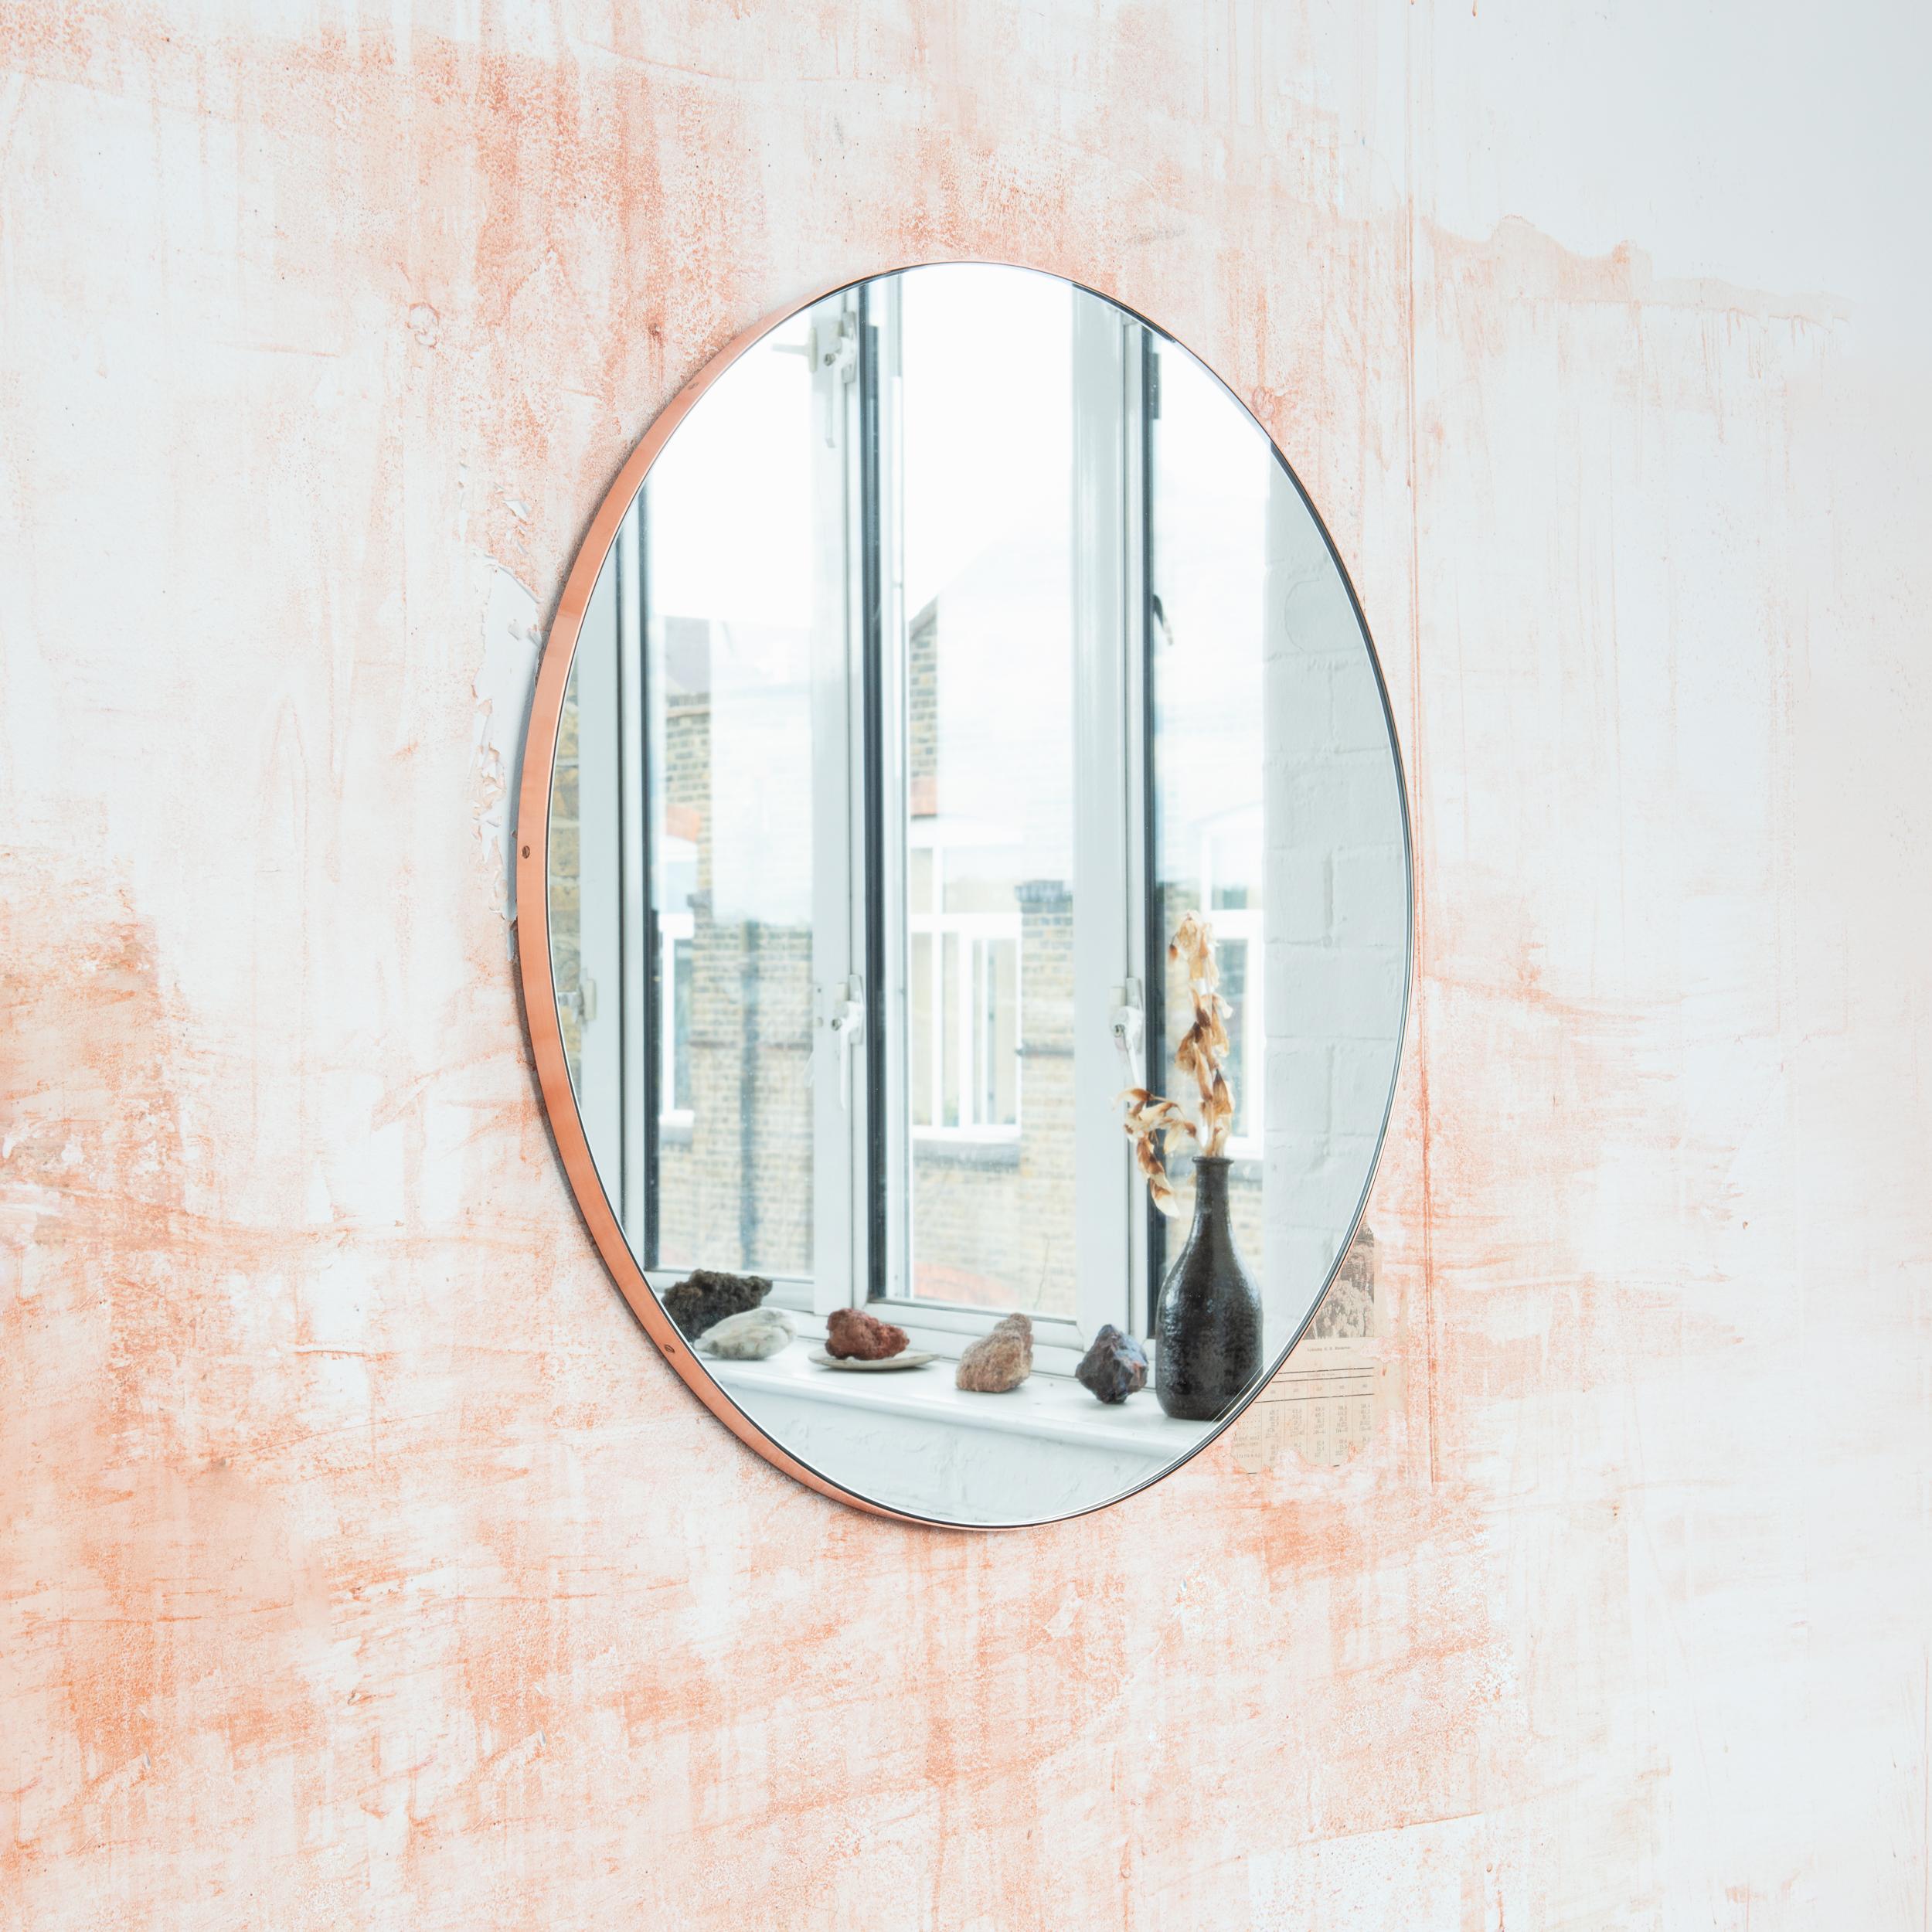 Minimalist Orbis™ round mirror with an elegant solid brushed copper frame. The detailing and finish, including visible copper plated screws, emphasise the craft and quality feel of the mirror, a true signature of our brand. Designed and made in